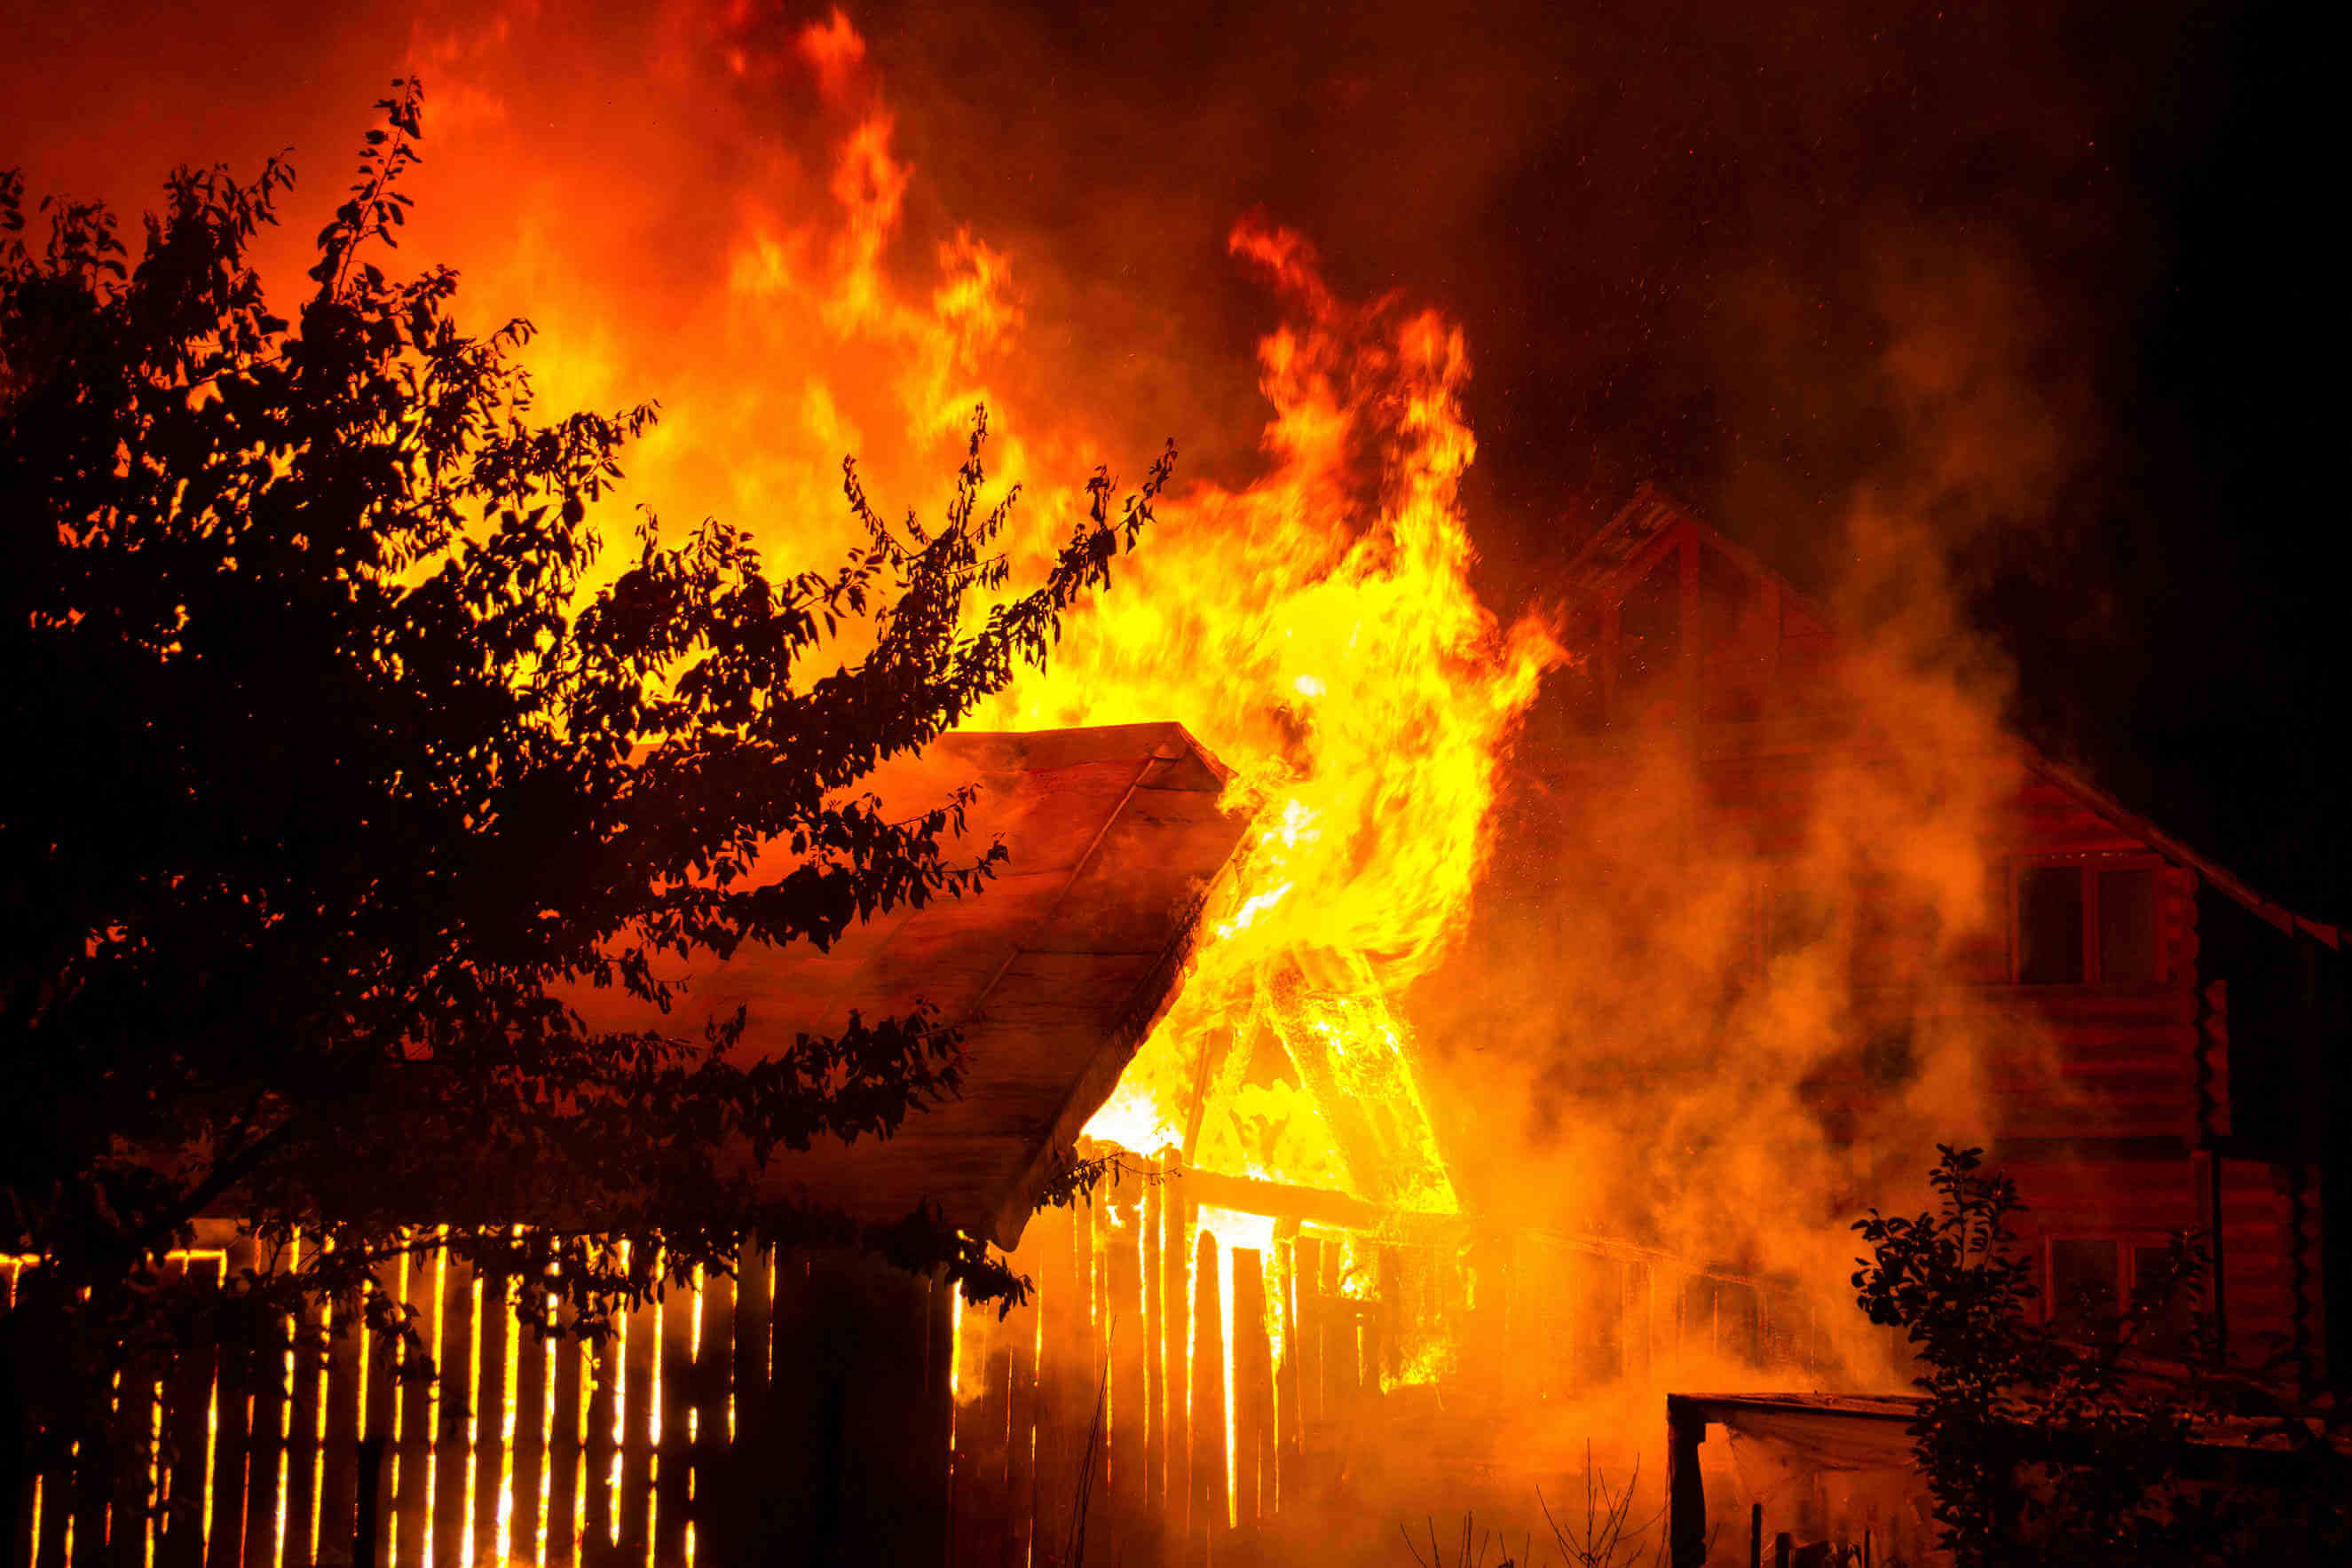 Home engulfed in flames